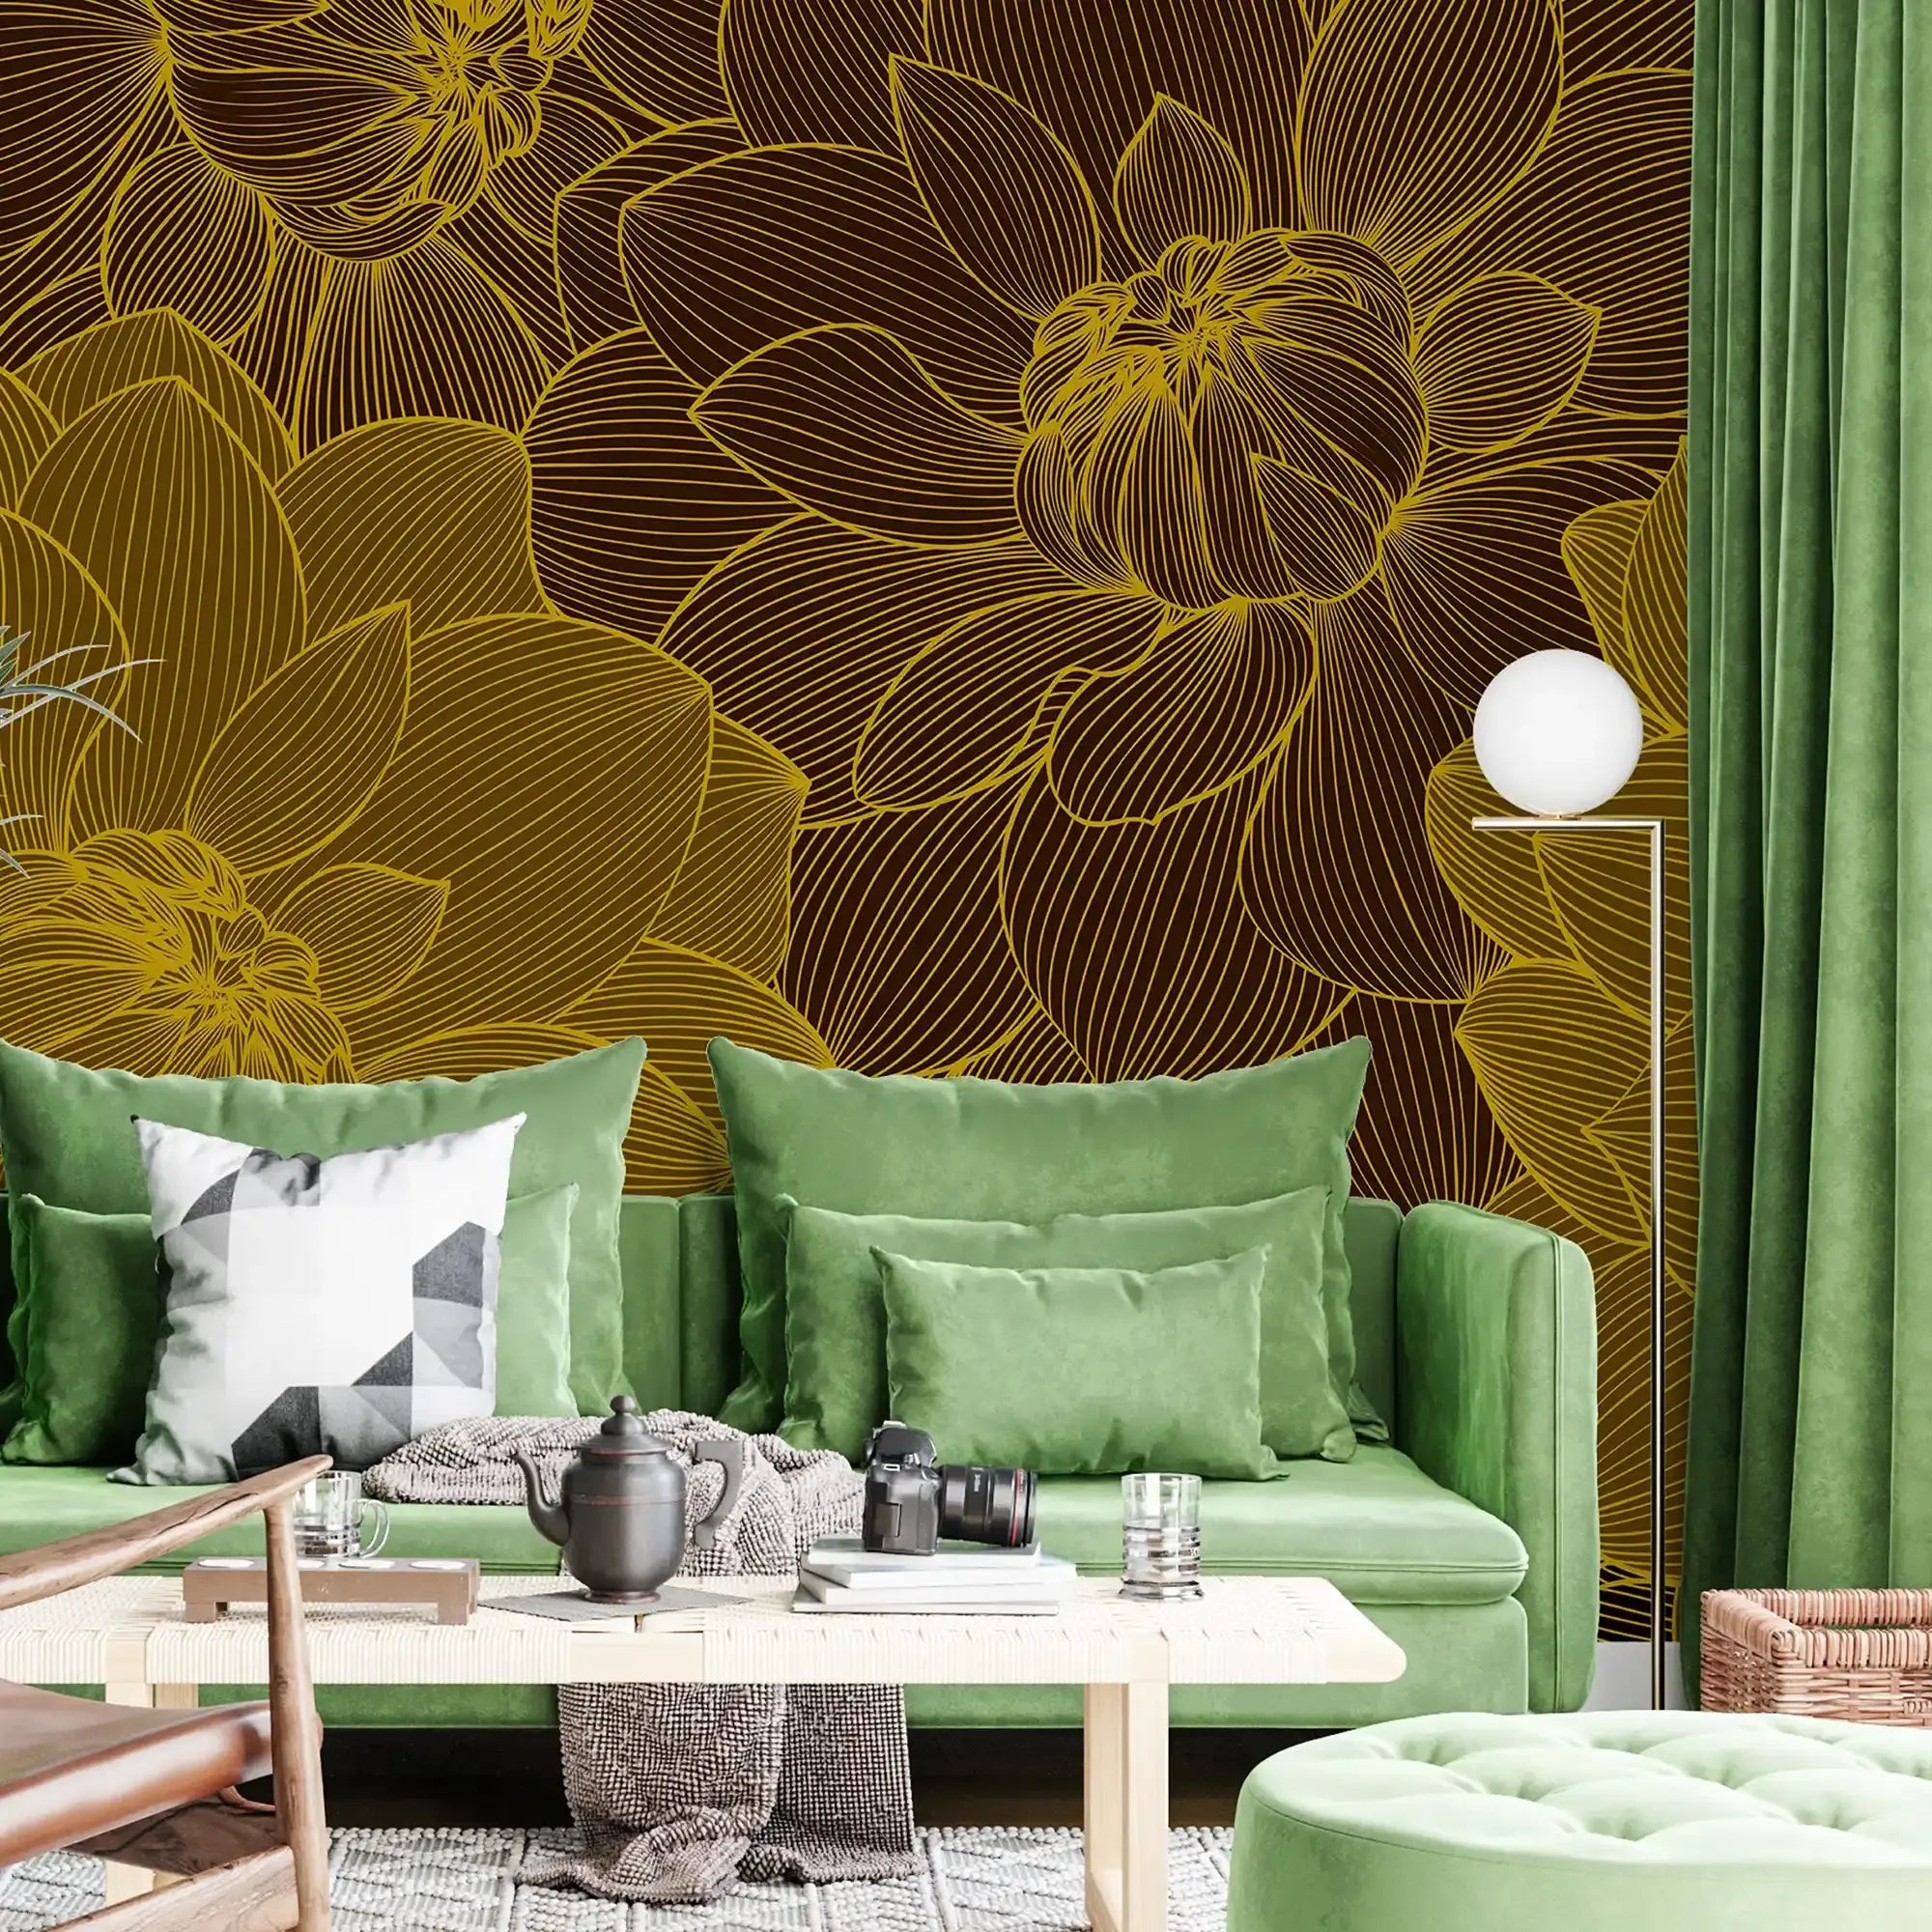 3090-A / Trendy Geometric Floral Self-Adhesive Wallpaper: Transform Your Walls with Easy Install - Artevella